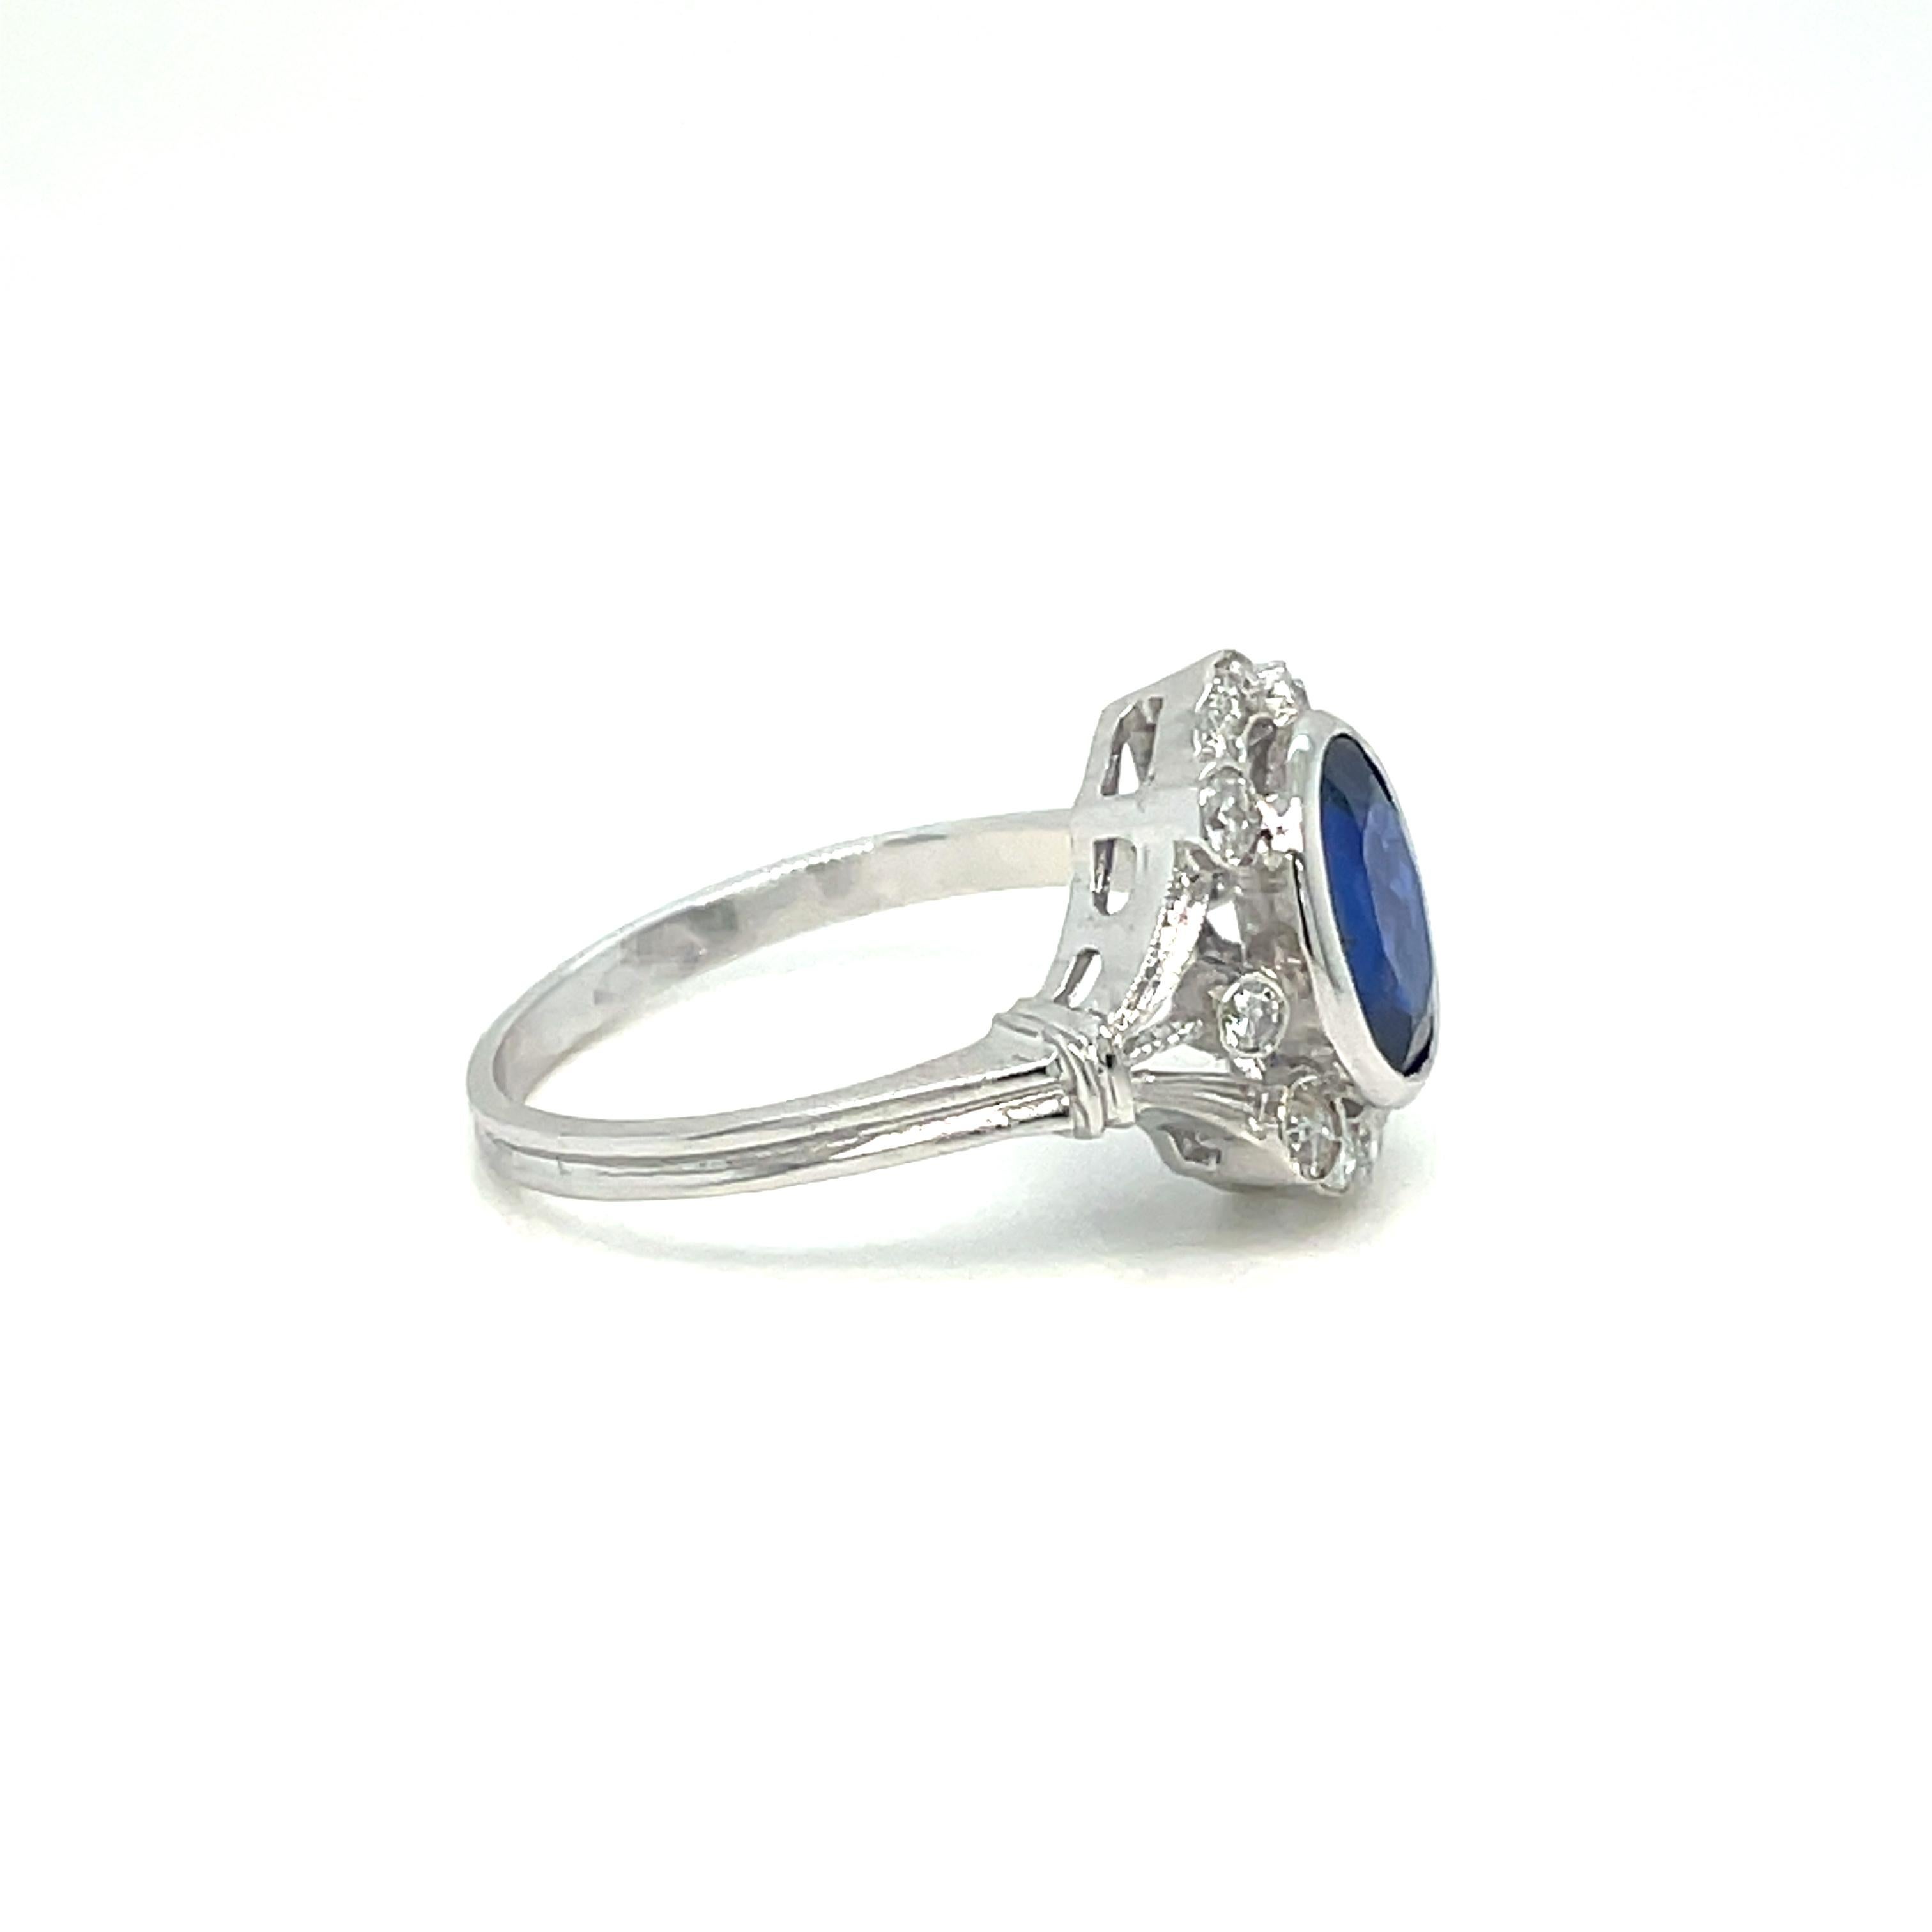 Art Deco Certified Burma Sapphire Diamond Gold Ring In Excellent Condition For Sale In Napoli, Italy